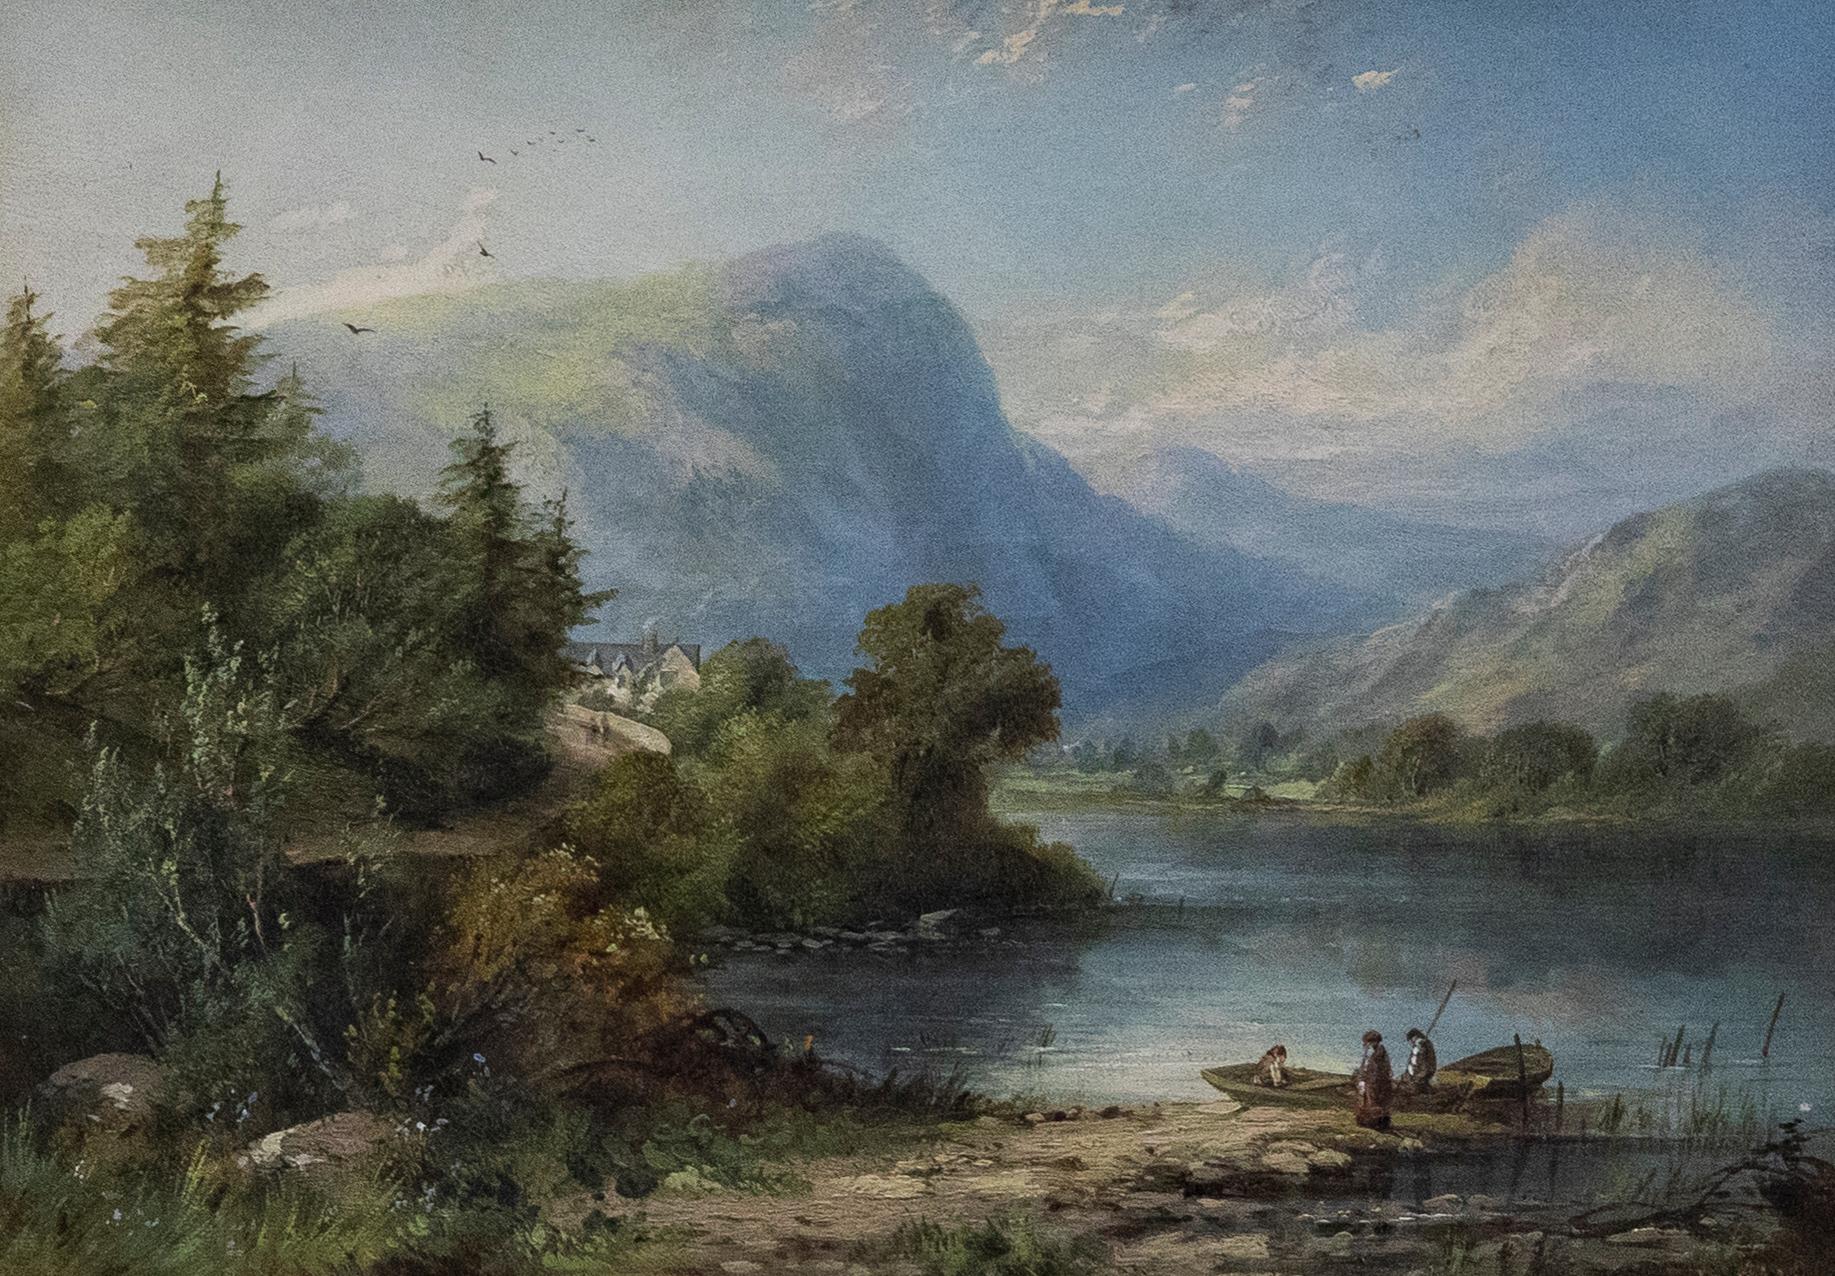 A charming oil study by listed artist Edward Partridge depicting Llyn Gwernan in North Wales. In the foreground figures set out on a small rowboat before a vast mountainous landscape. To the left hand side of the composition a building that is now